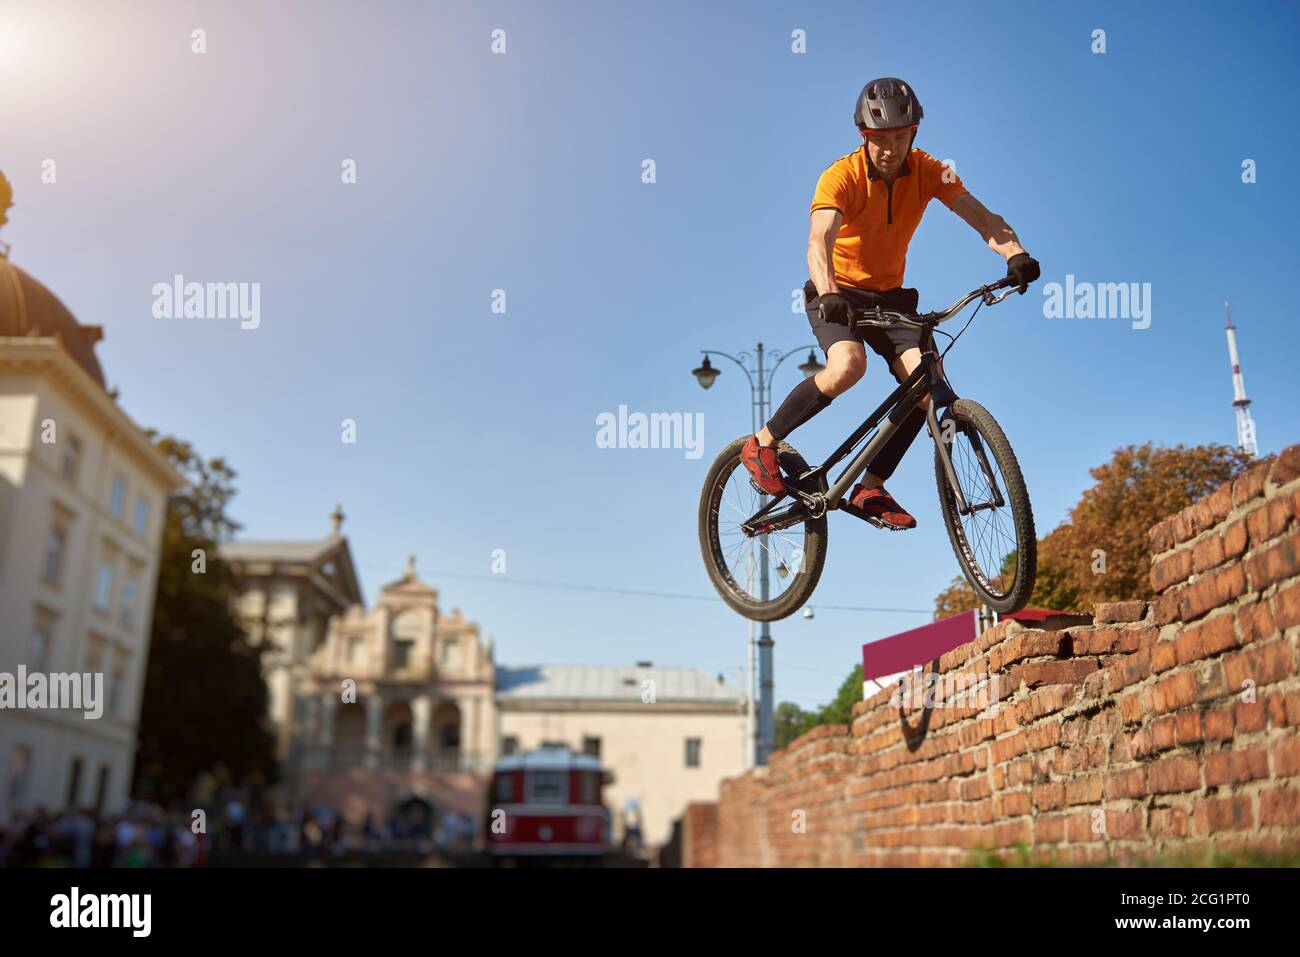 Horizontal snapshot of a freestyle biker jumping from a brick wall making extreme stunt over blue sky, low angle view, urban buildings on background Stock Photo